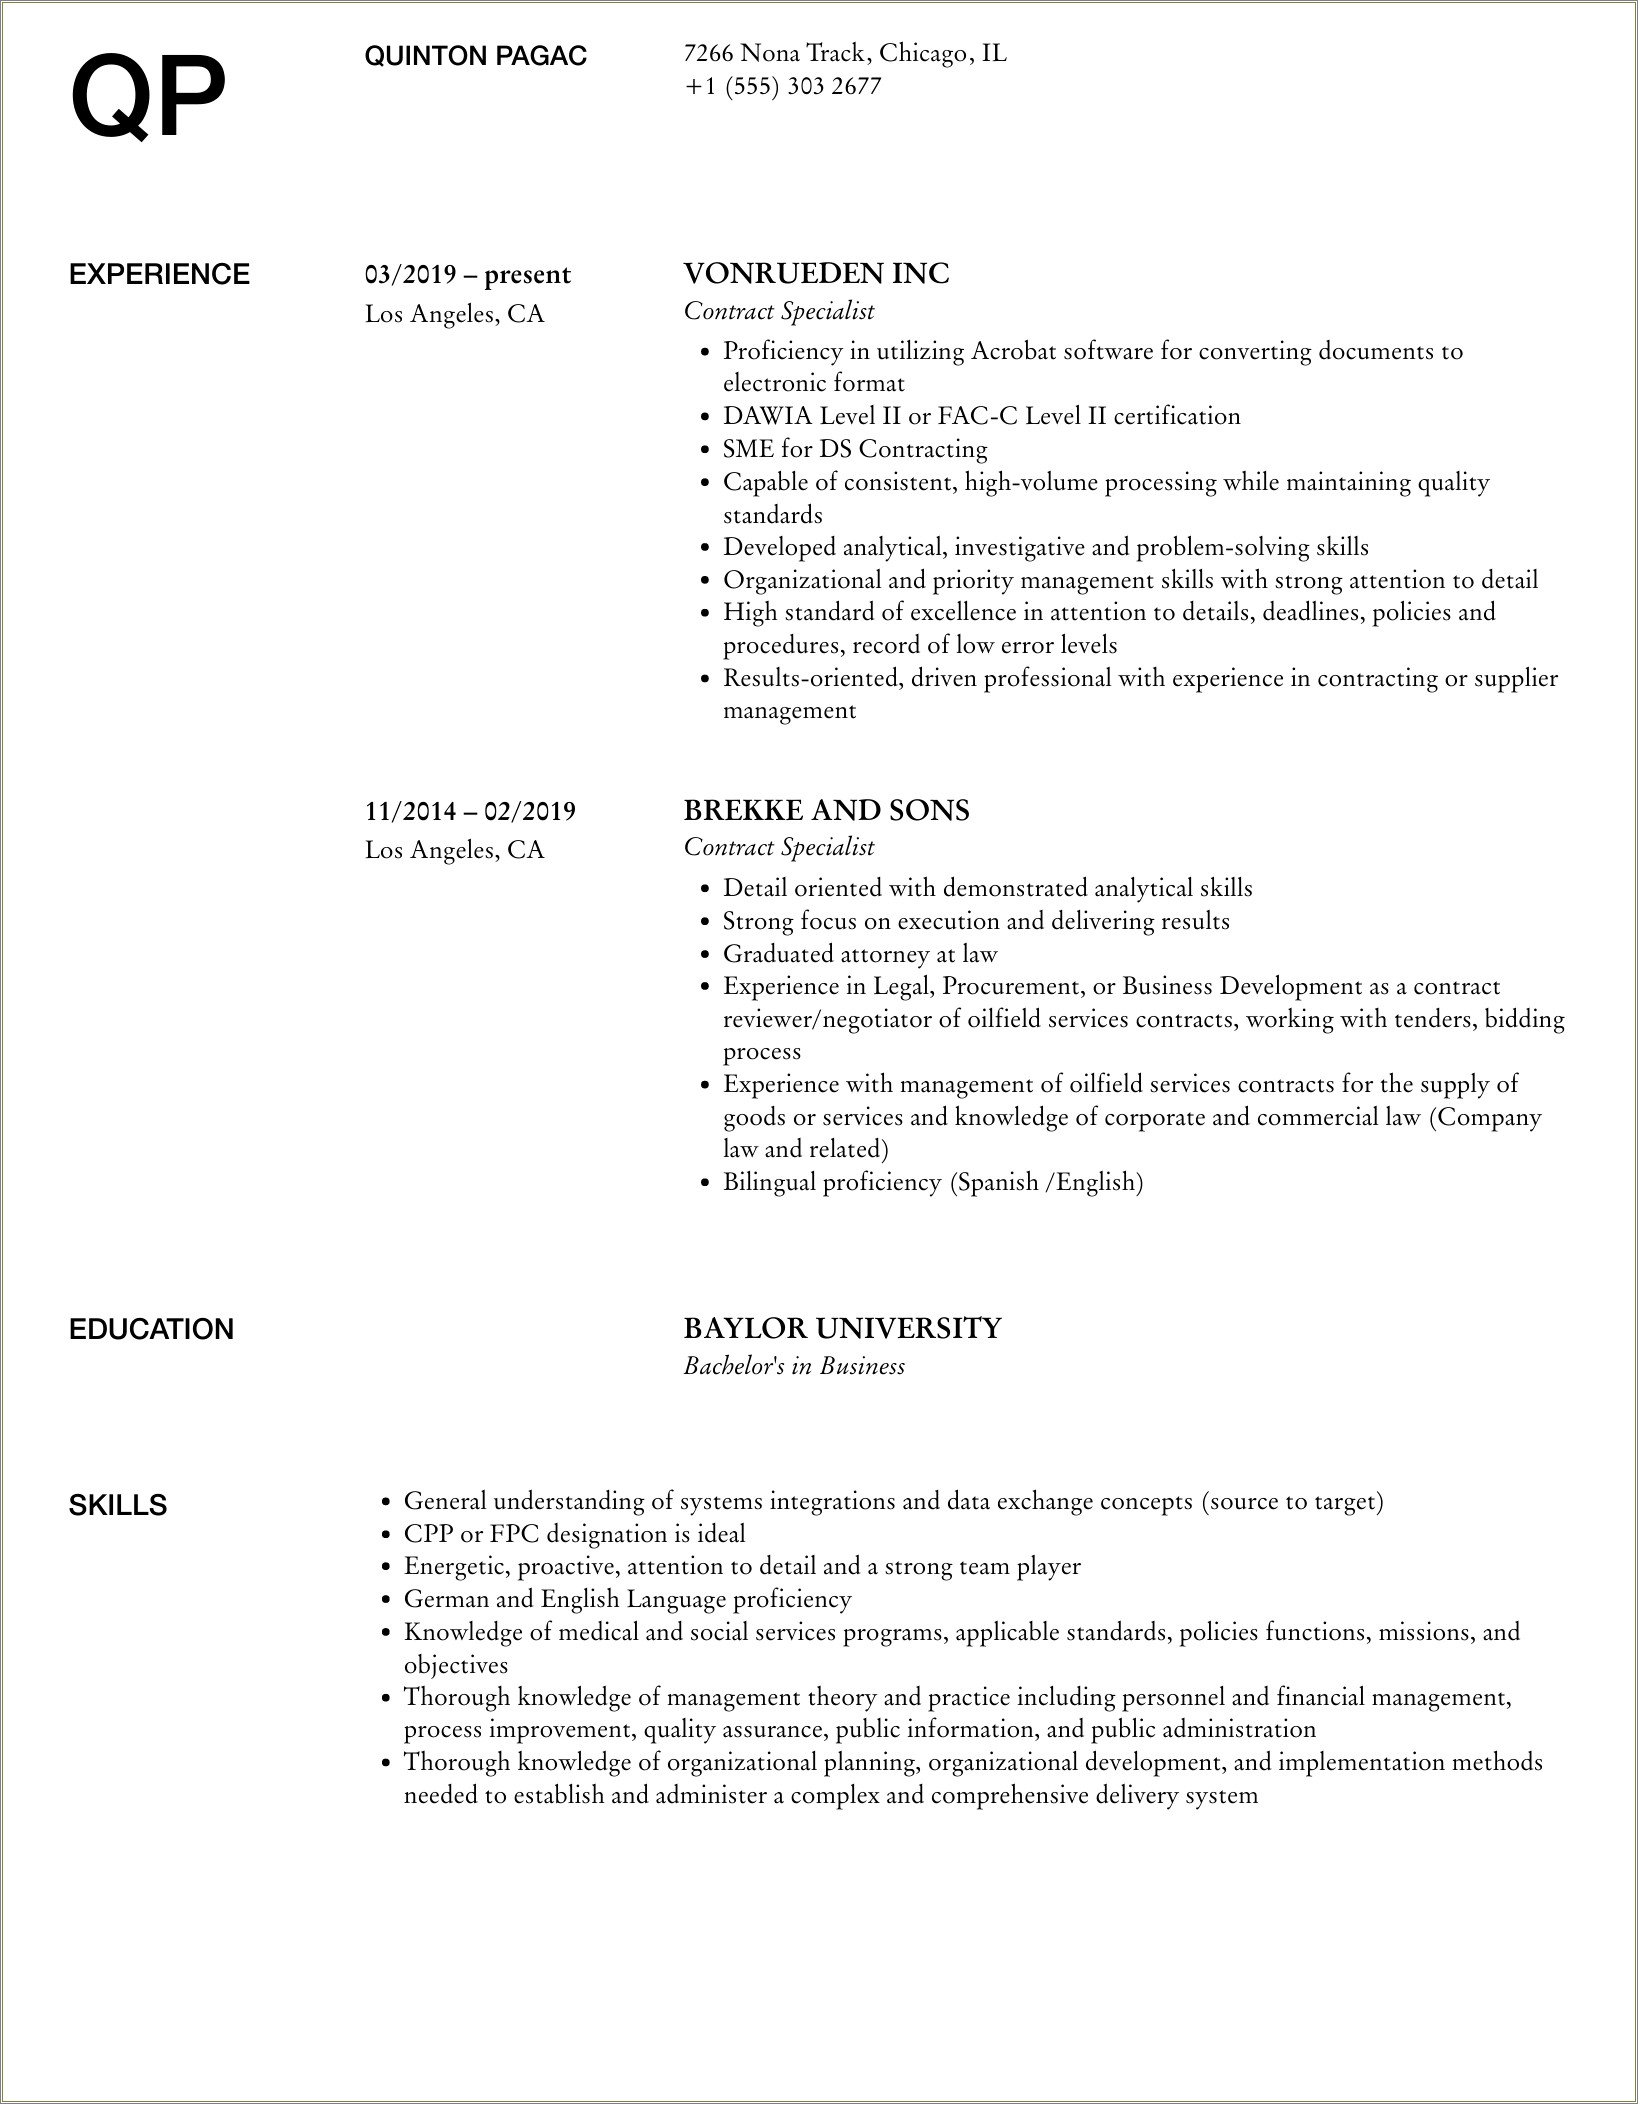 Resume Objective For Legal Contract Specialist